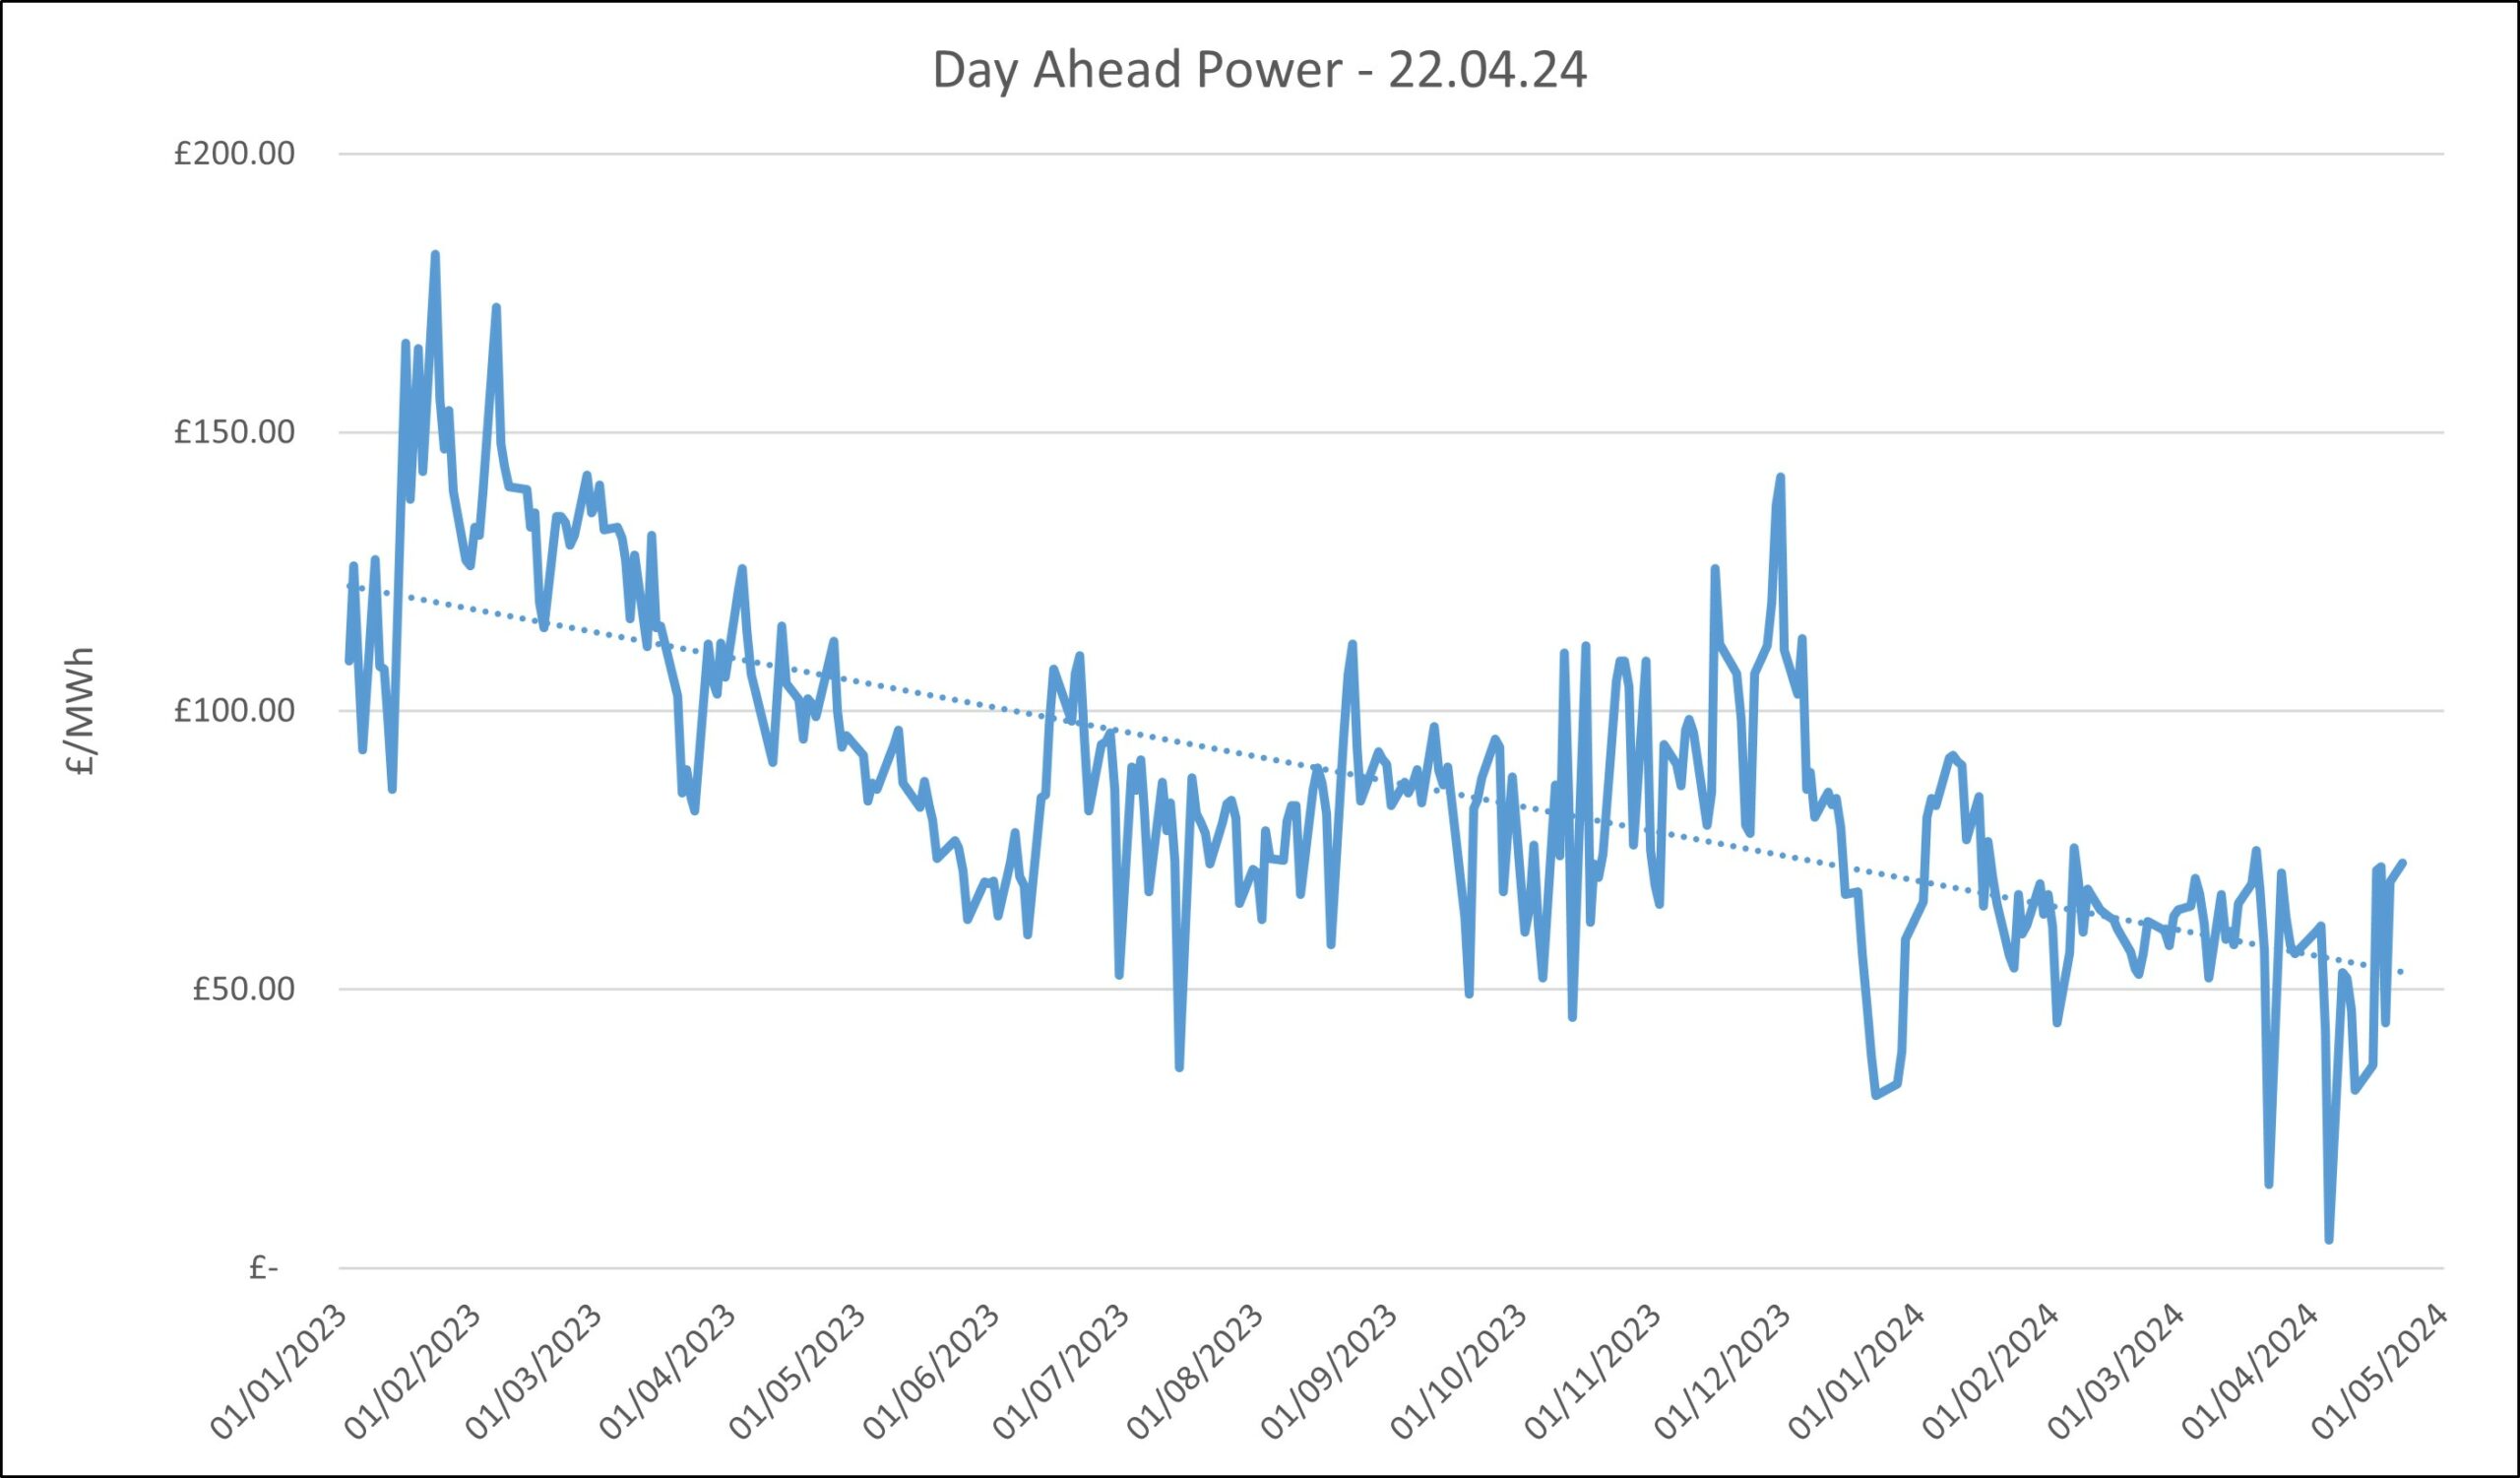 wholesale electricity prices day ahead 22.04.24